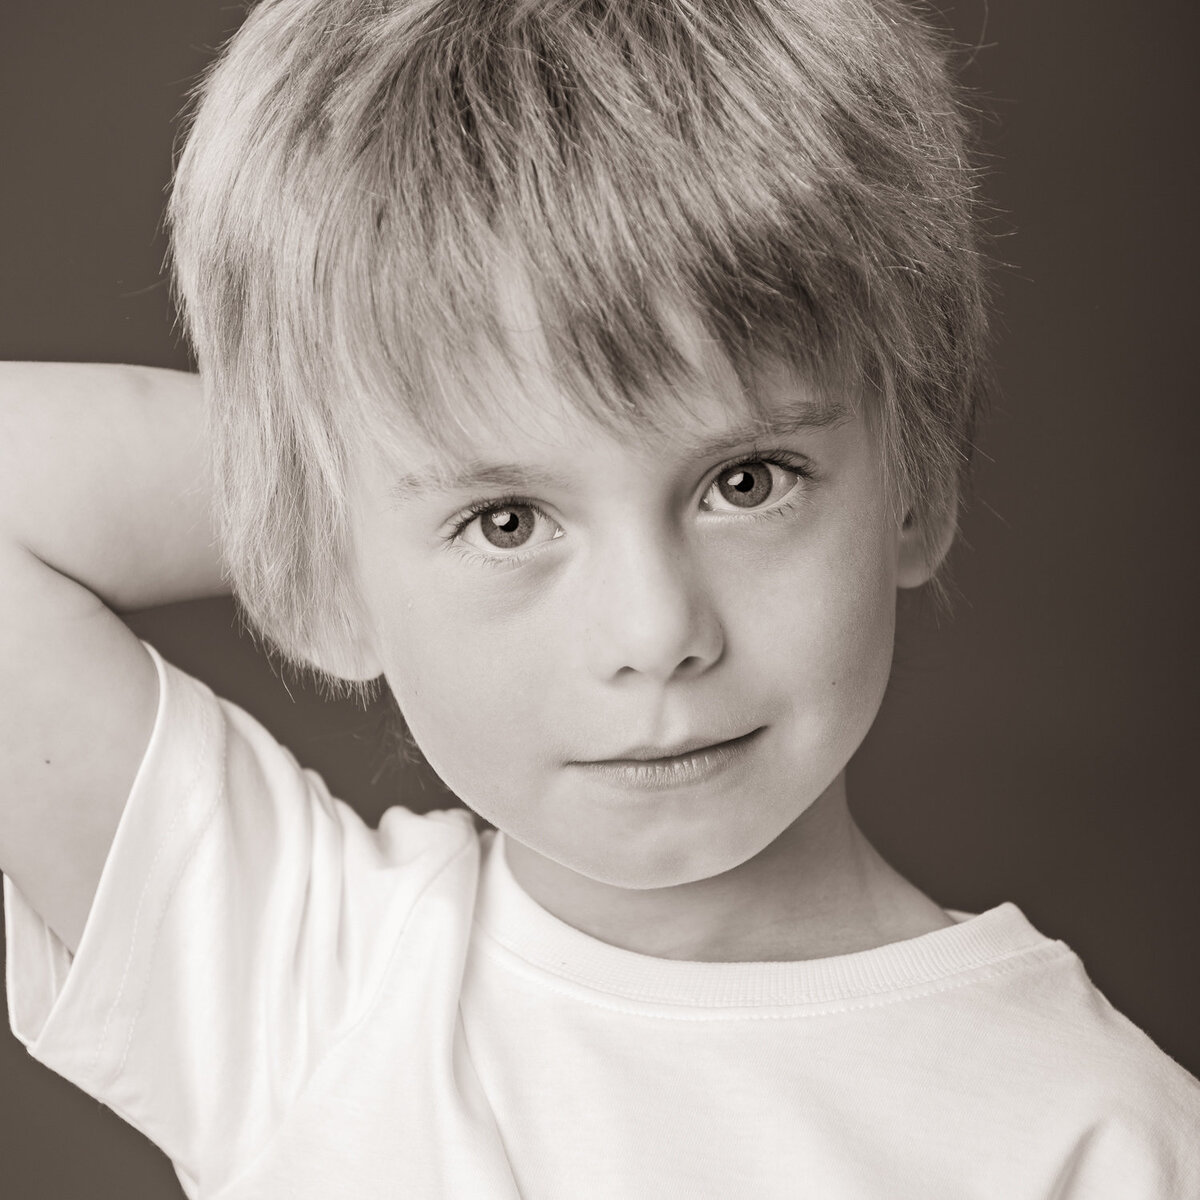 black & white photograph of a child wearing a white t shirt